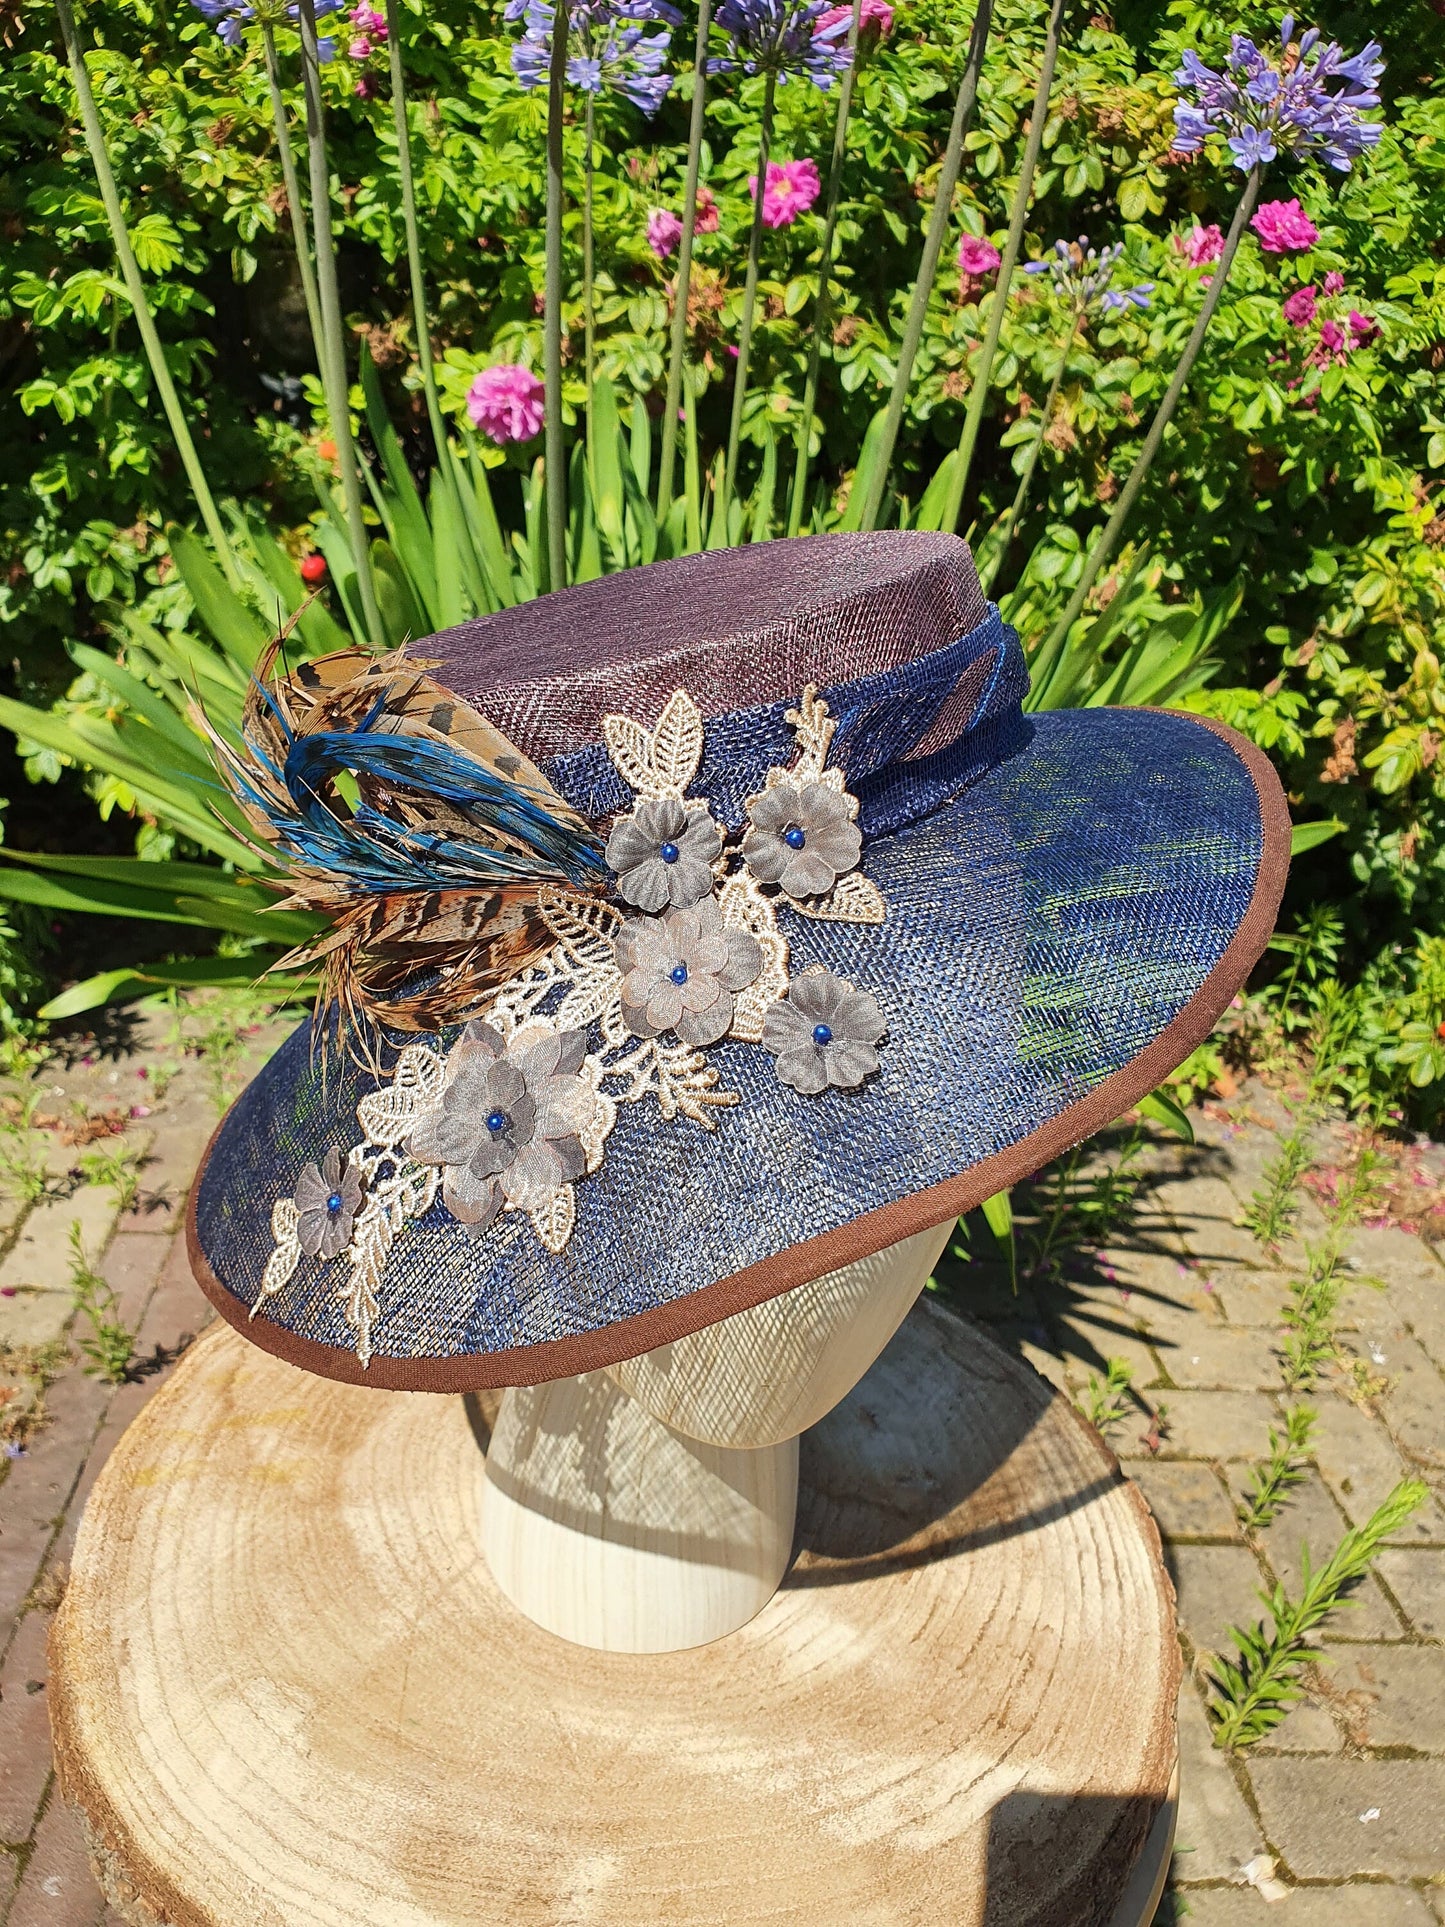 Elegant handmade sinamay hat in blue and brown- Elegant style for any occasion, event hat, wedding hat, guest hat